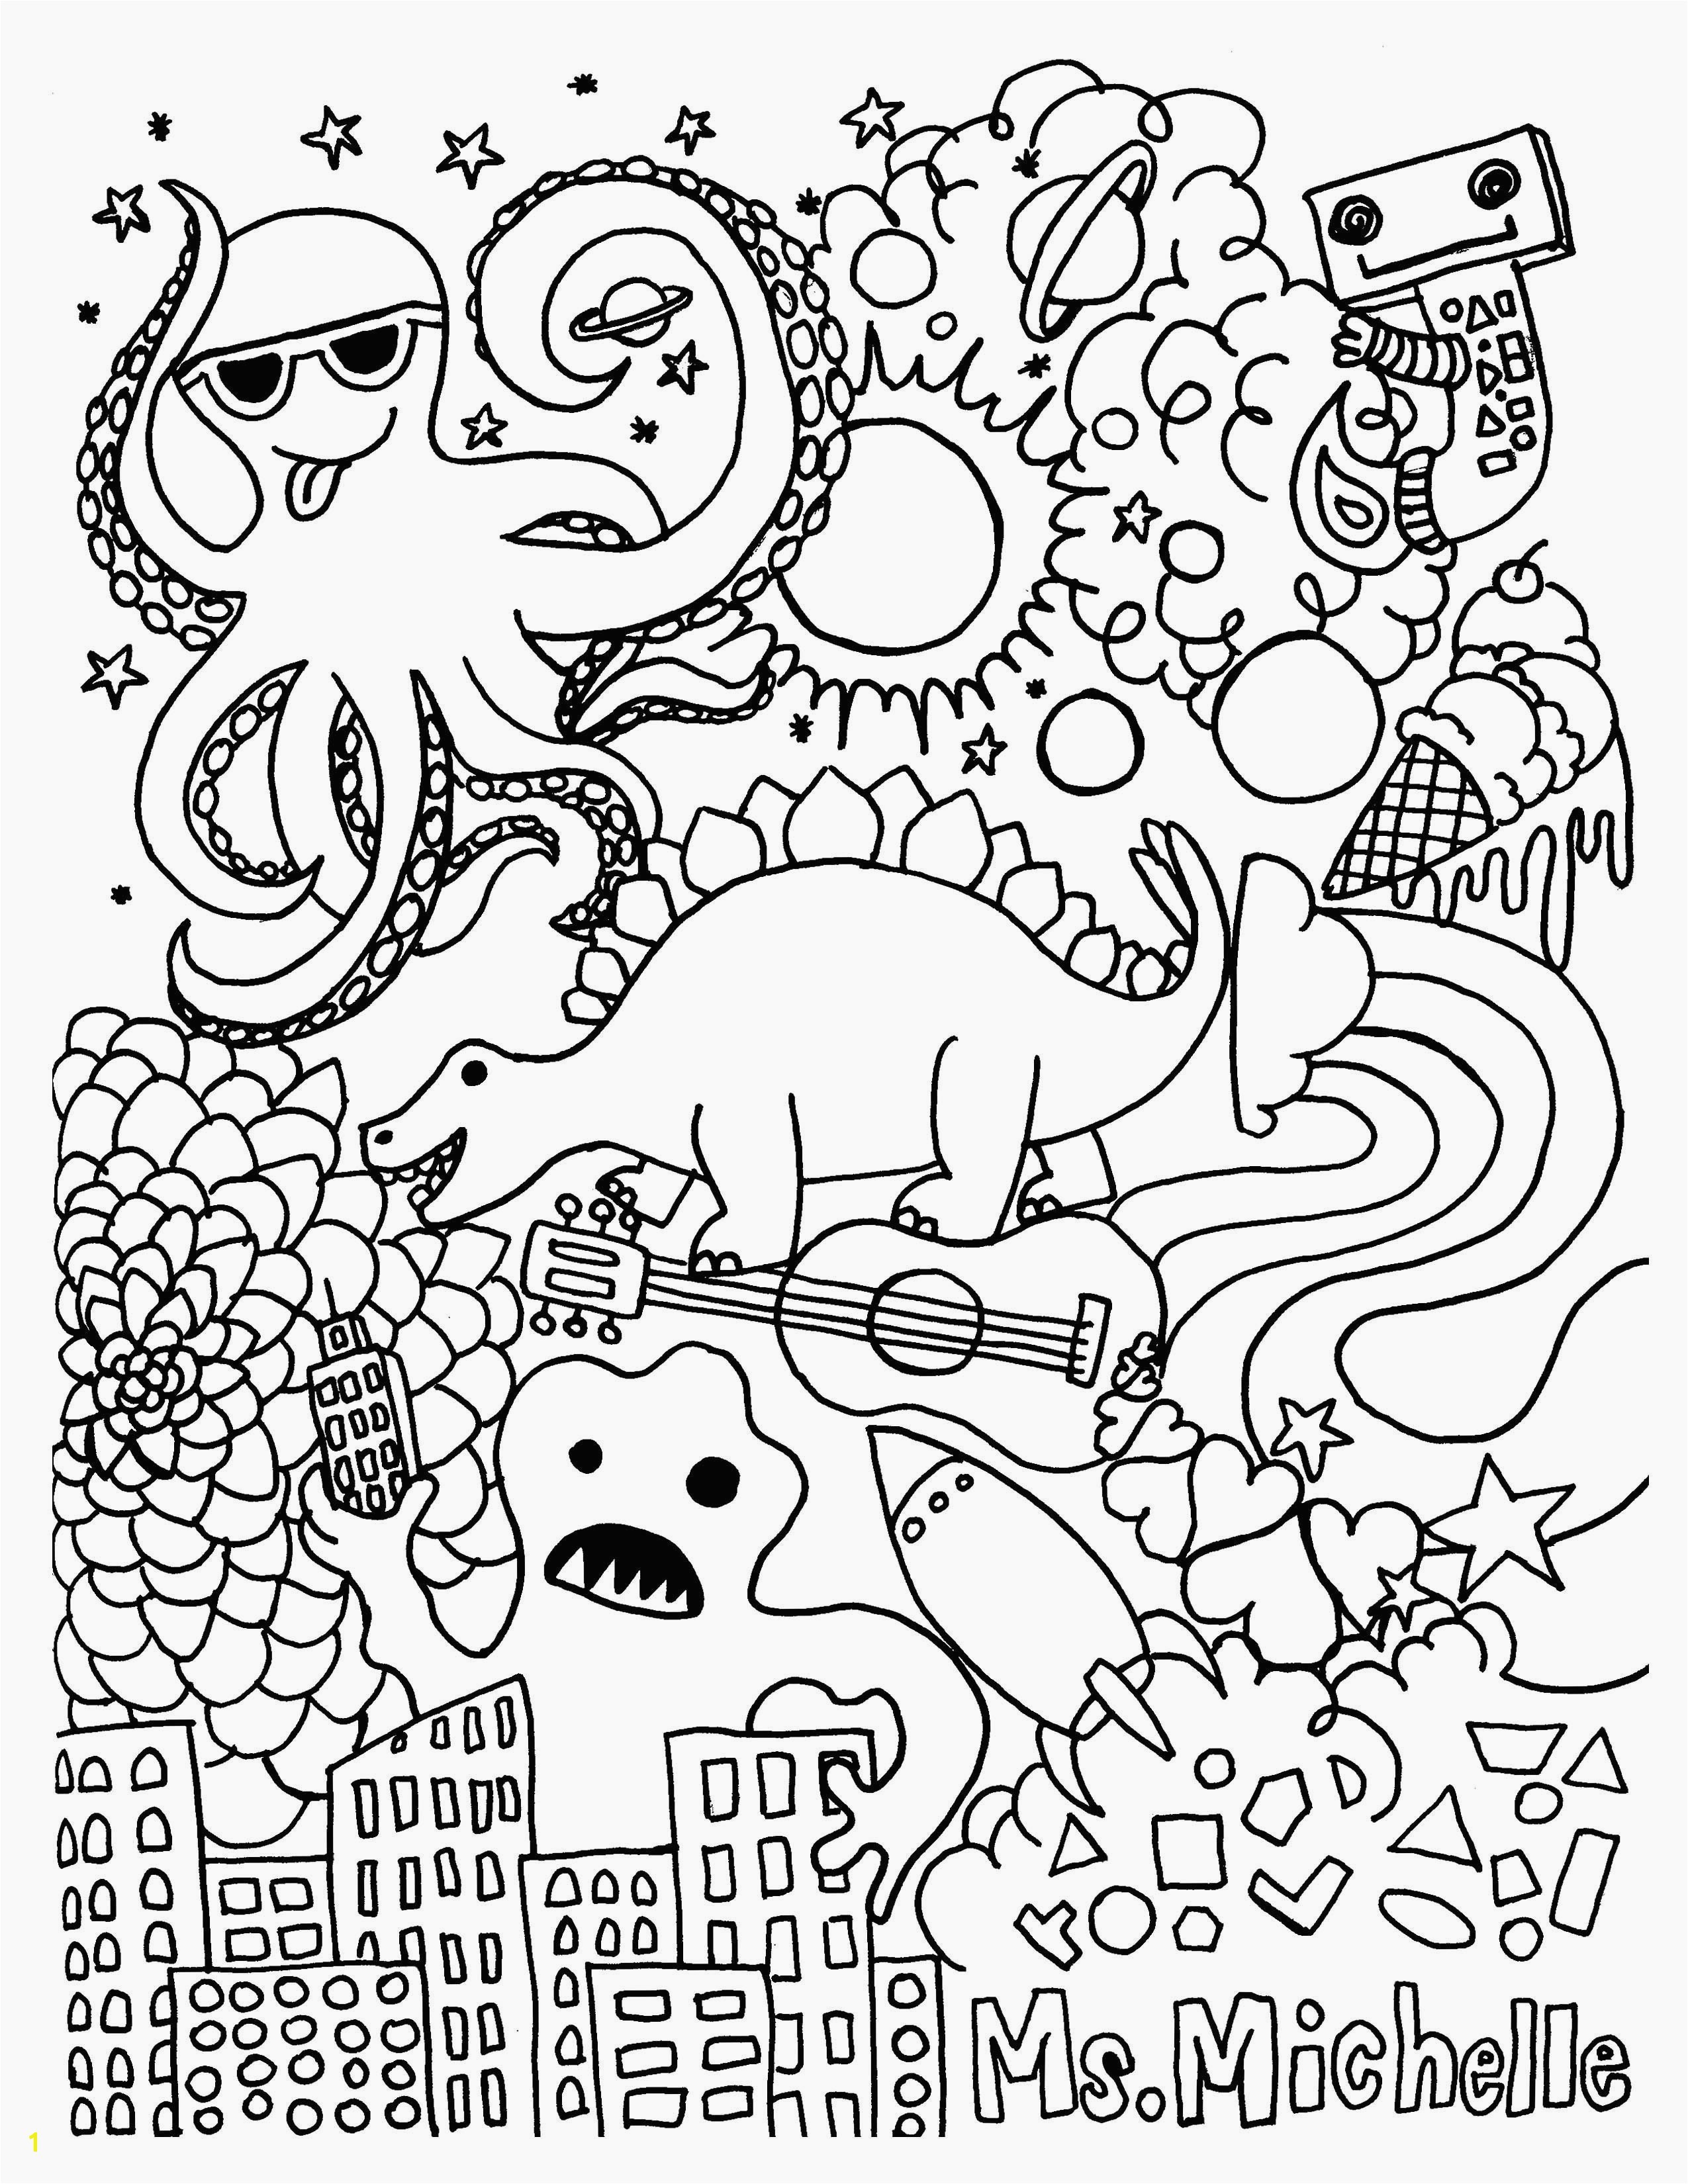 Hidden Pictures Coloring Pages 12 New Hidden Coloring Pages